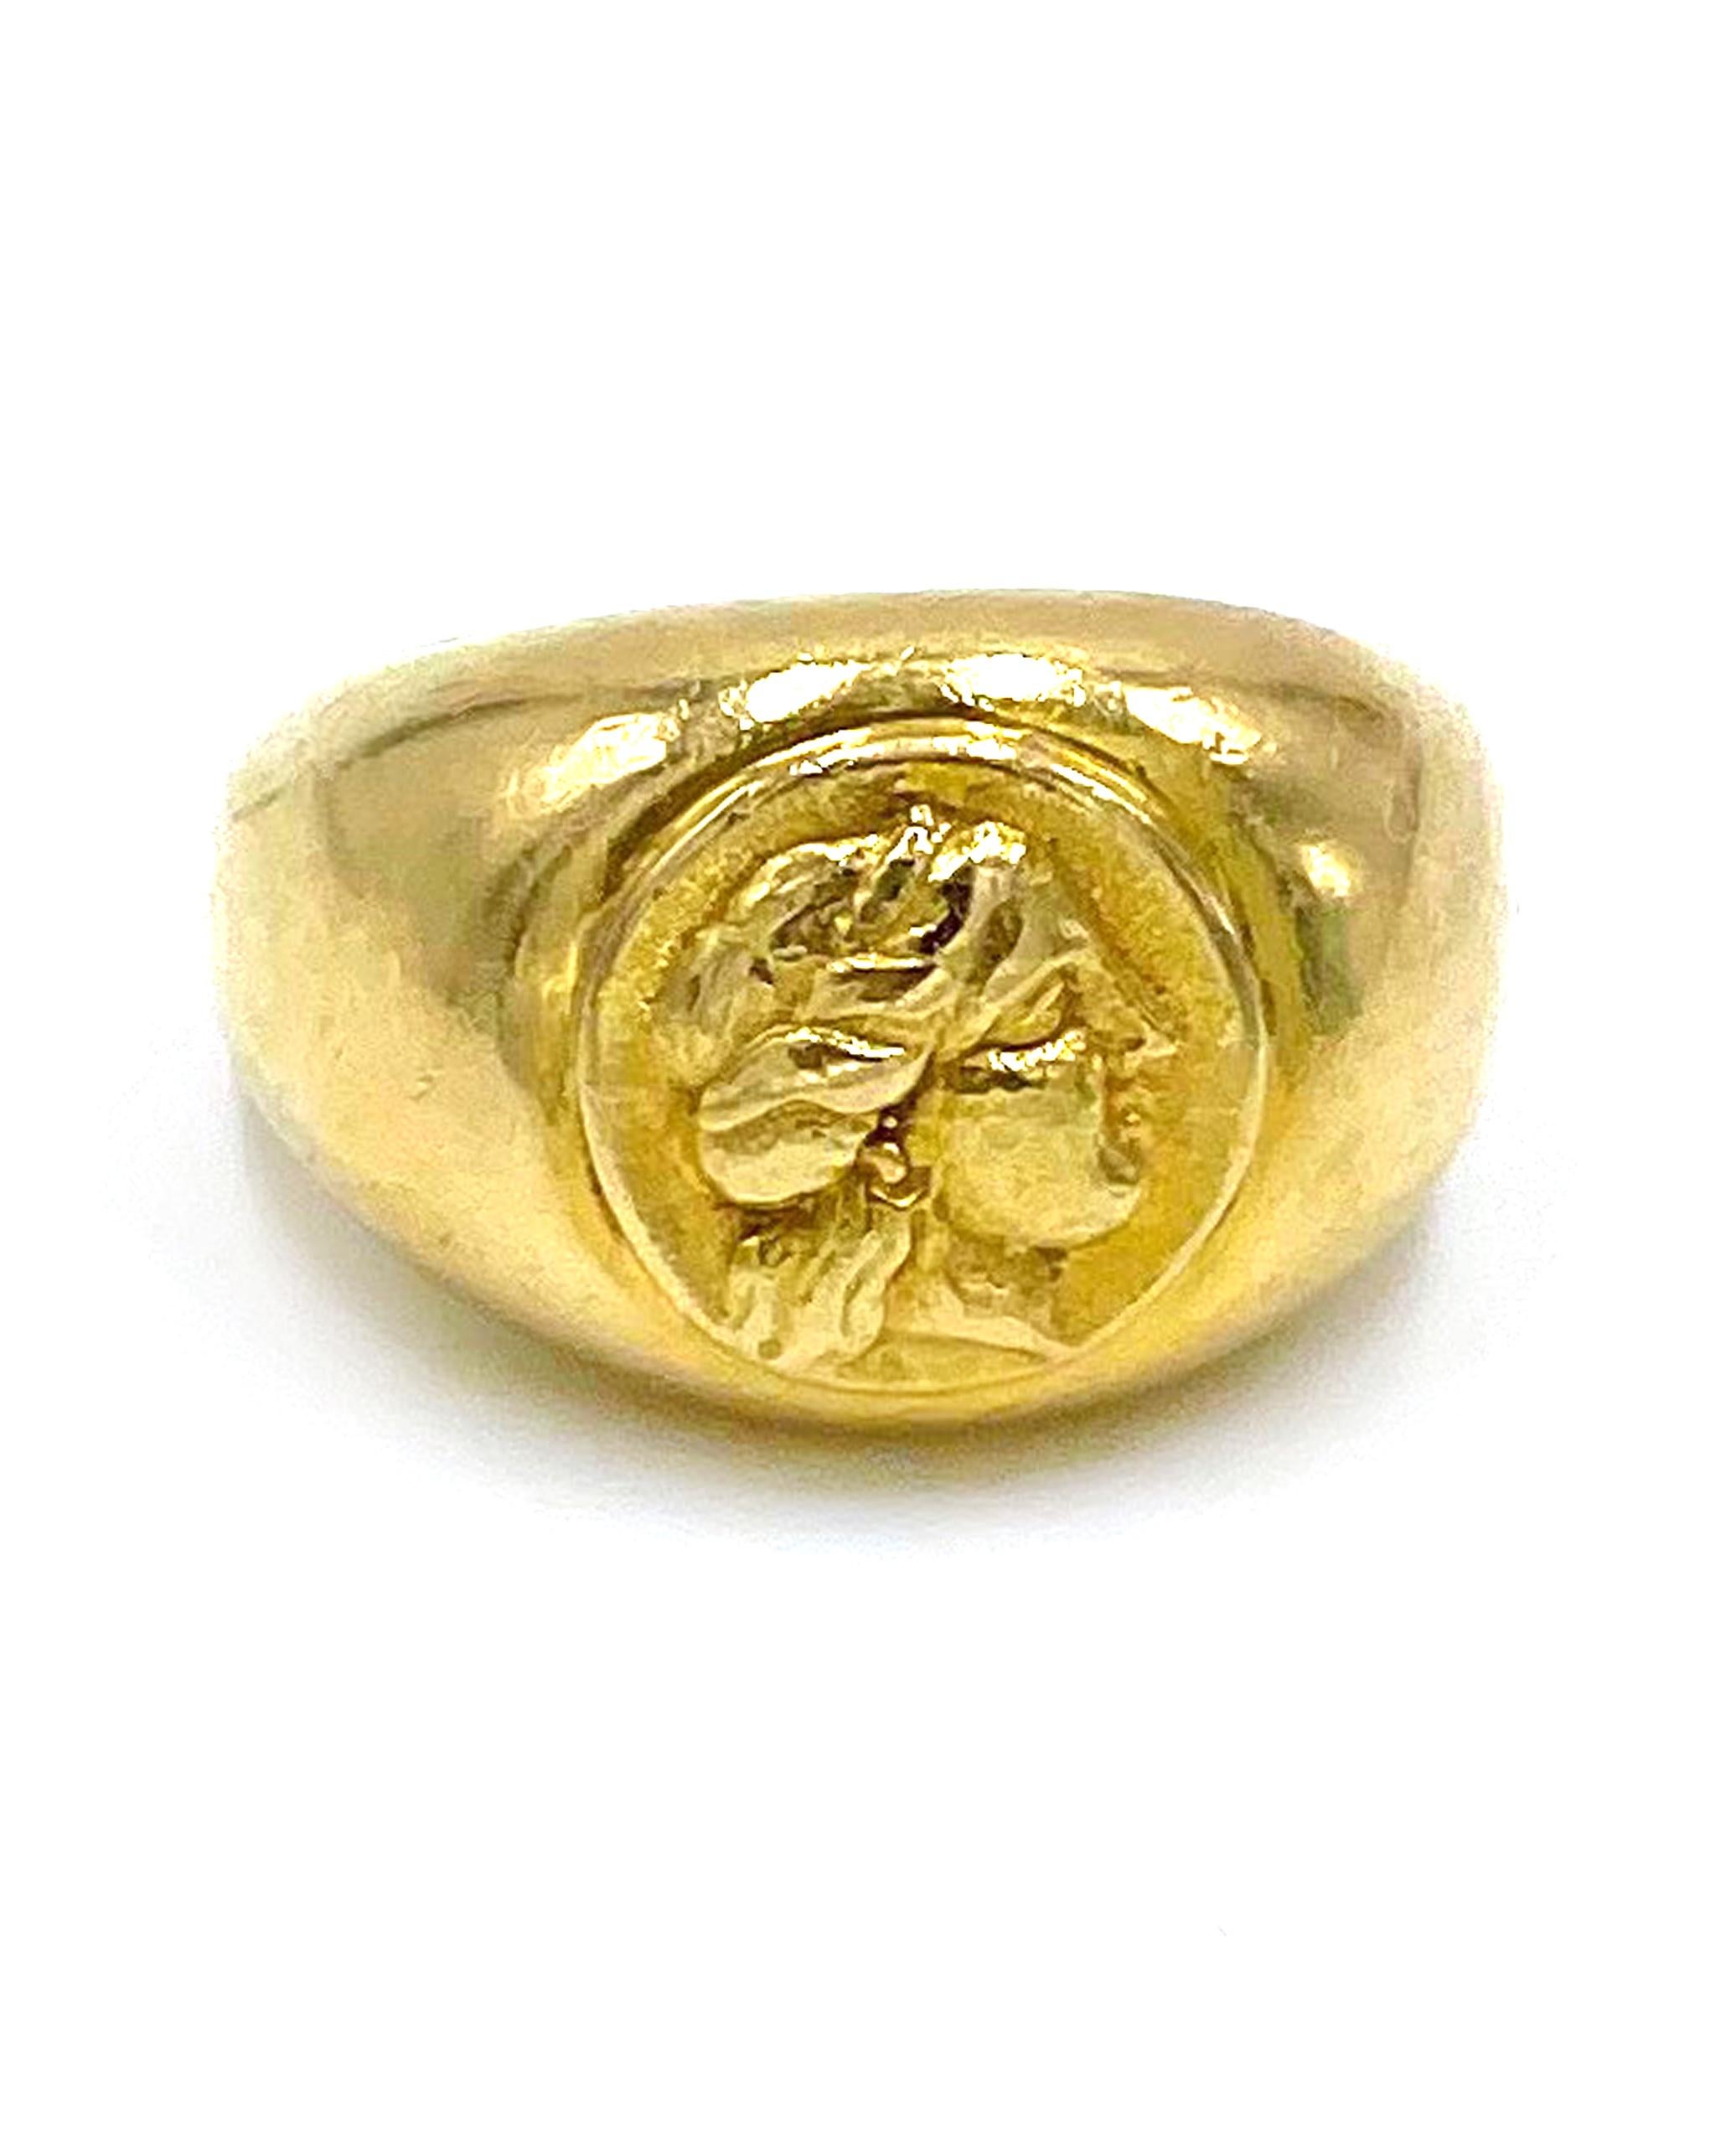 Pre owned vintage estate 18K yellow gold signet style domed ring centered with raised profile. 

* Finger Size: 8
* Weight: 19.0 grams
* Pre-owned: scratched evenly throughout
* Can be polished upon request